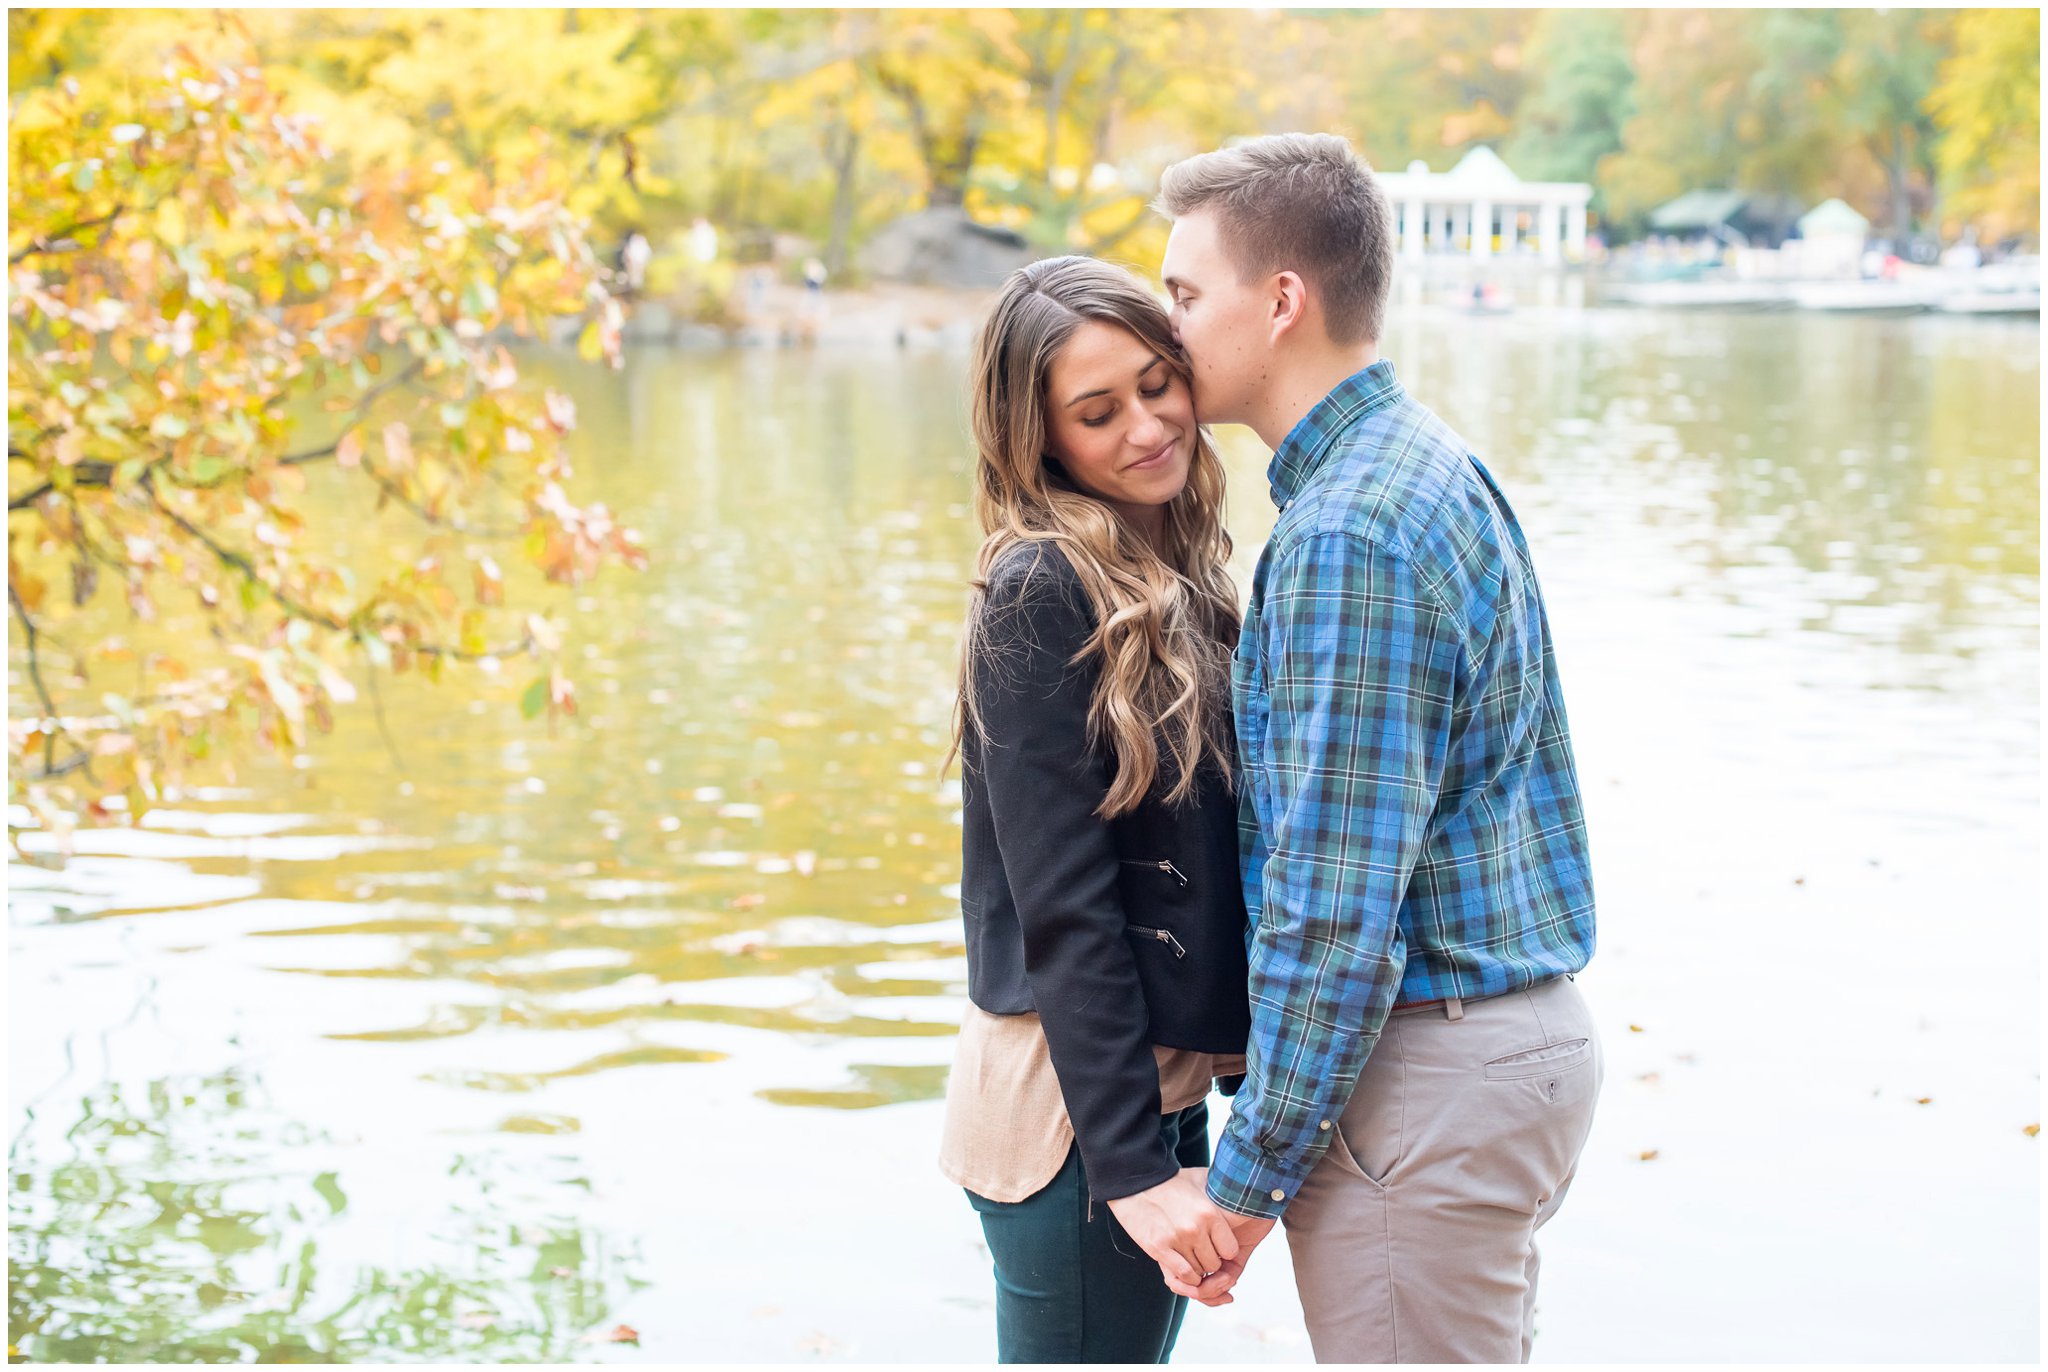 What to wear for your engagement session - Laura Lee Photography